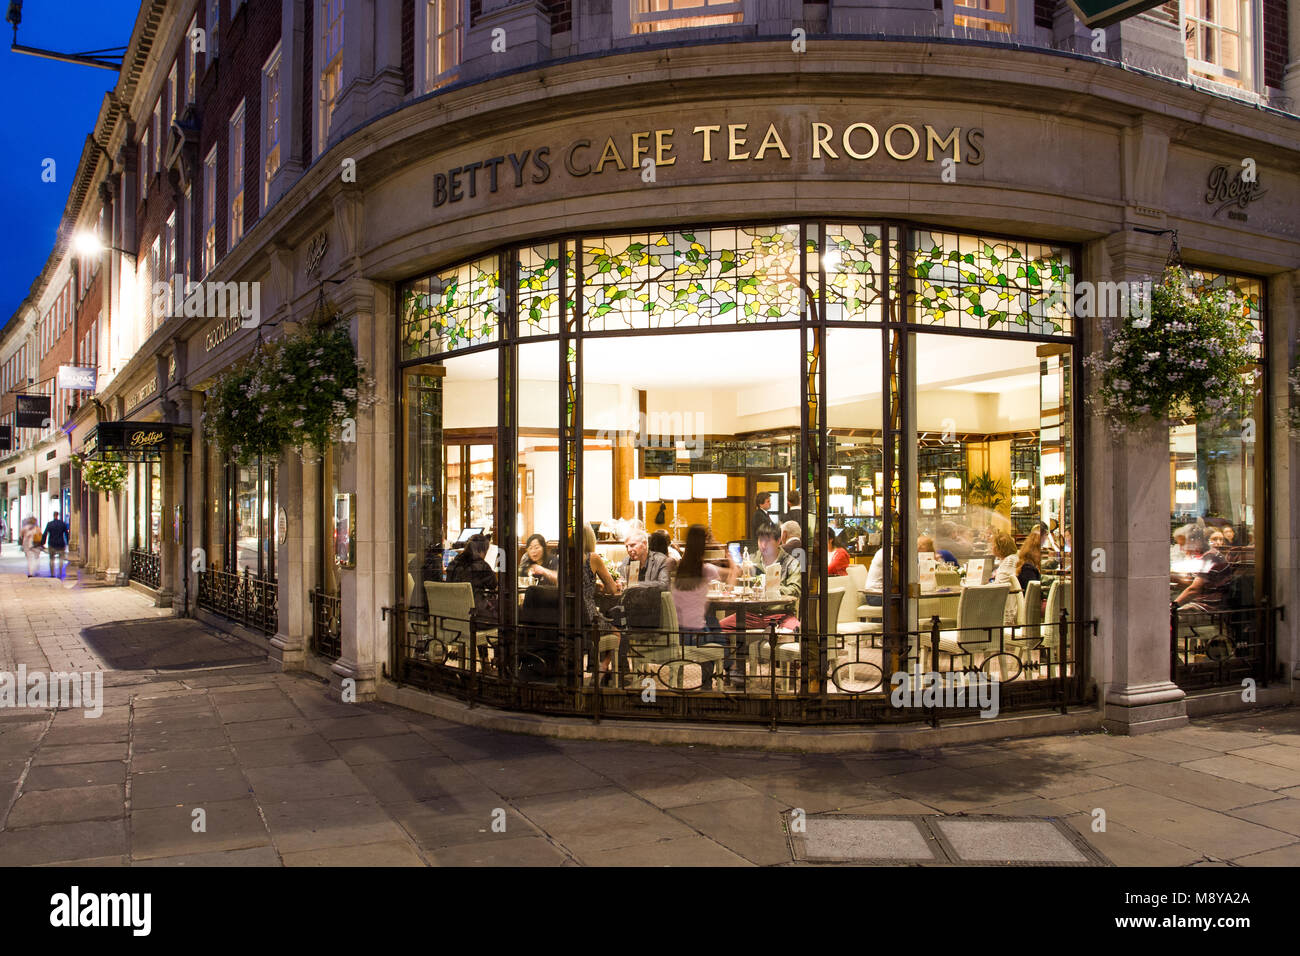 St Helens Square, York, UK - SEPTEMBER 9, 2016. The exterior of the popular Betty's Cafe and Tea Rooms shown at night with a warmly lit interior. Stock Photo